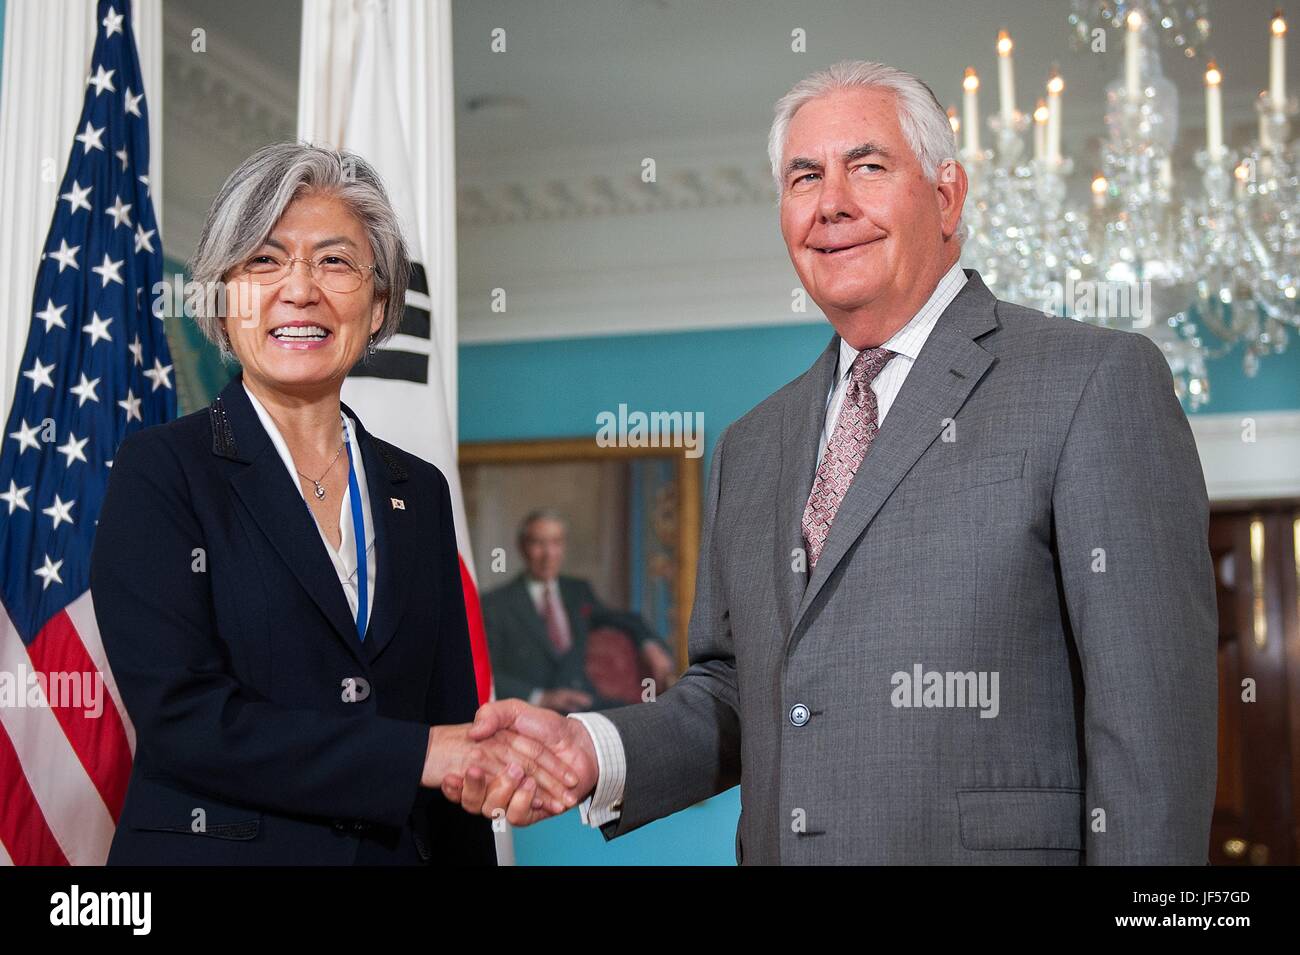 U.S. Secretary of State Rex Tillerson welcomes Korean Foreign Minister Kang Kyung-wha before the start of a bilateral meeting June 28, 2017 in Washington D.C. Stock Photo